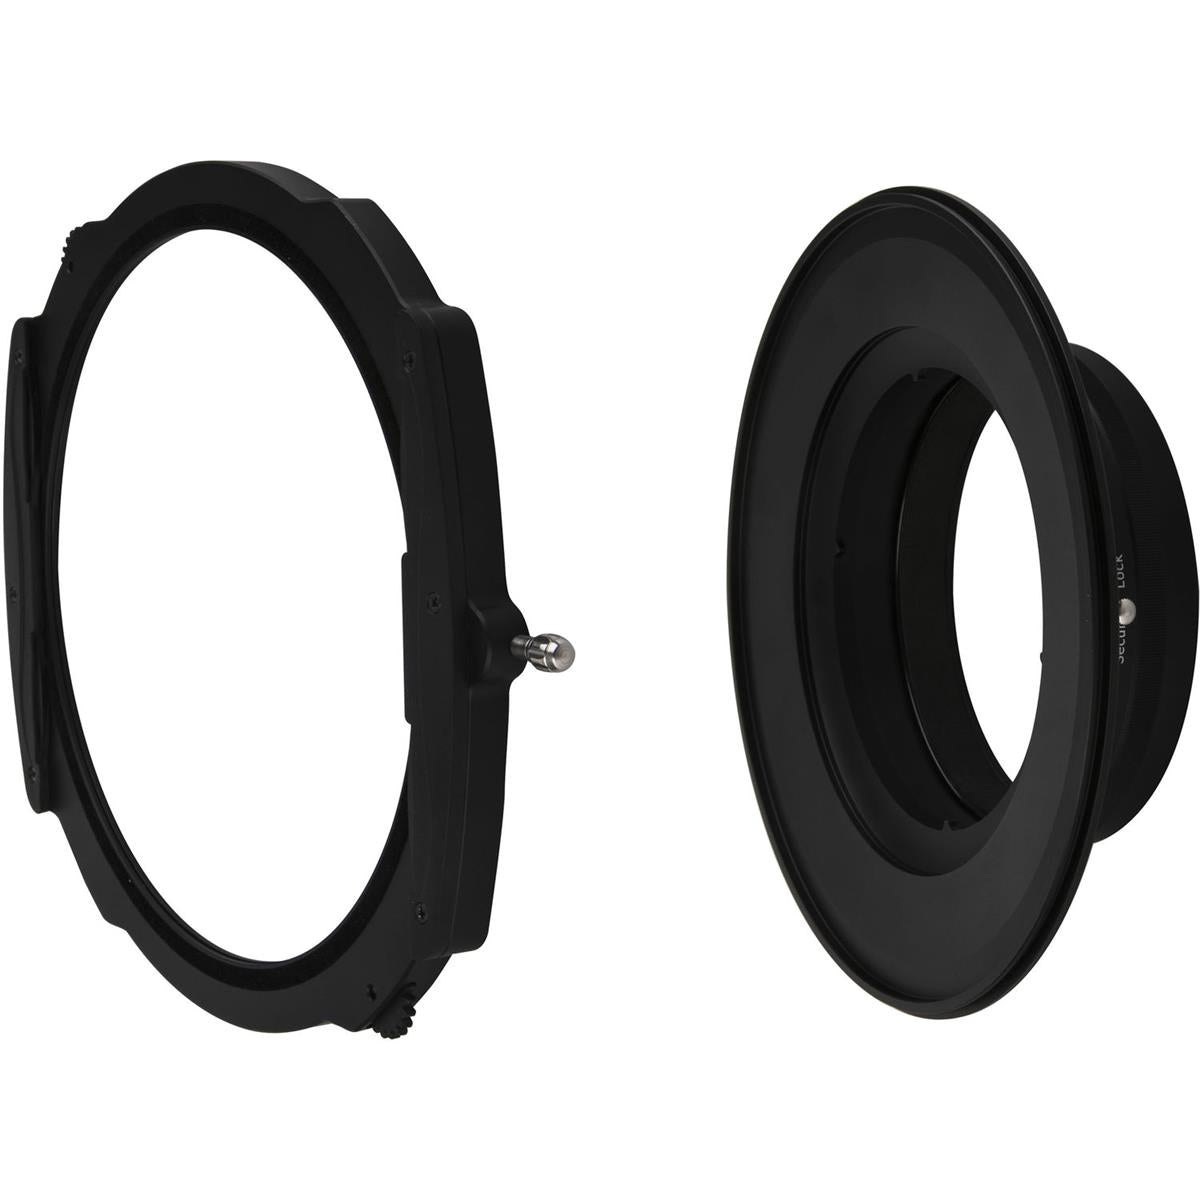 Haida M15 Filter Holder System for Sigma 14-24 F/2.8G DG DN Art for Sony E and Leica L